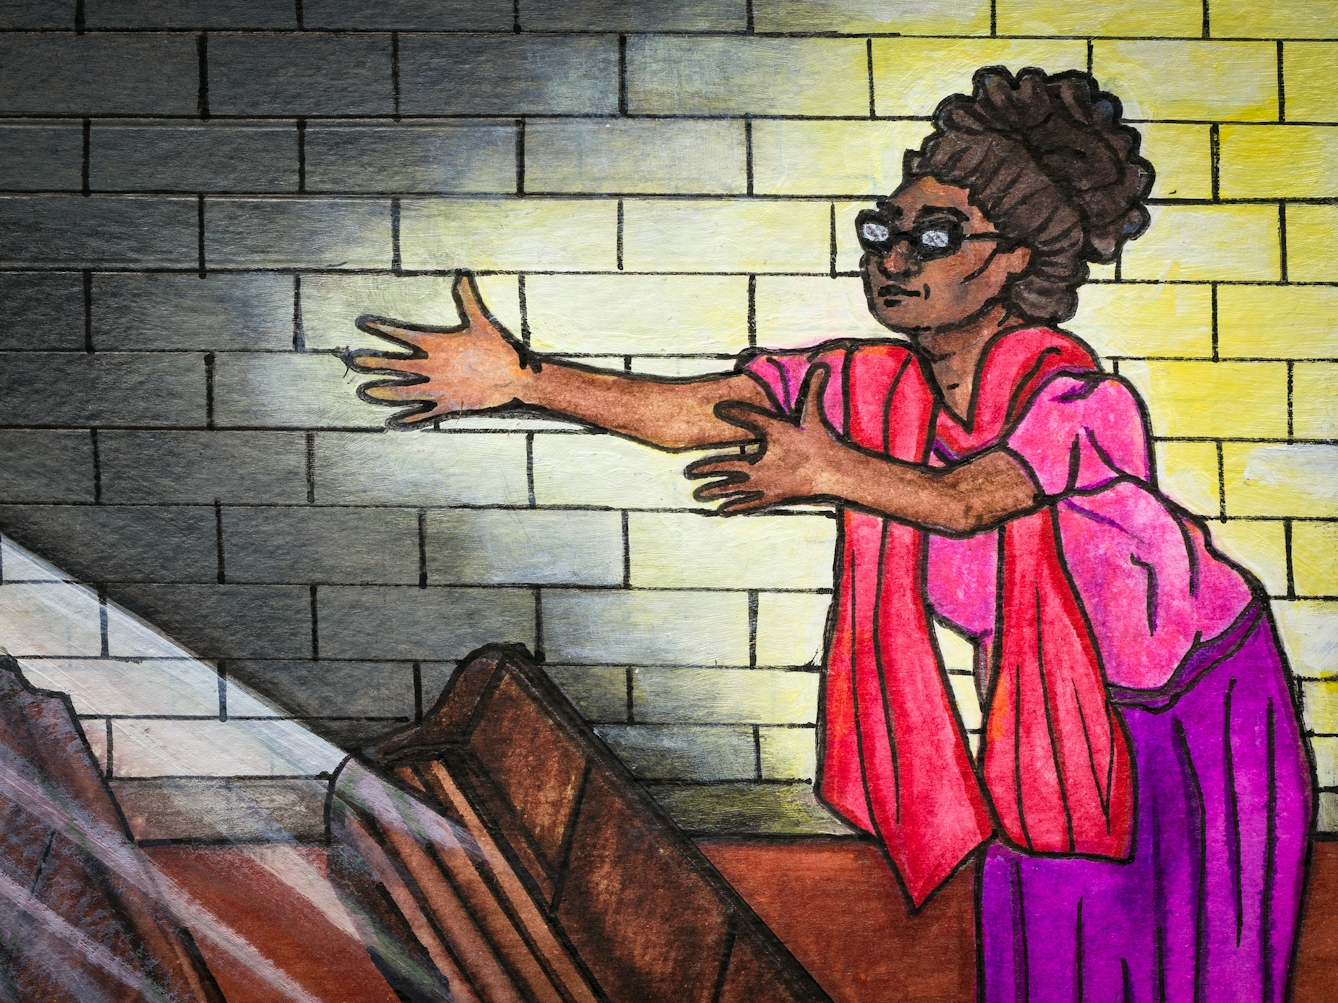 Detail from larger colourful artwork made with paint and ink on textured watercolour paper. The artwork shows a scene in a church with predominantly hues of greys, browns and purples. On the right side is a Black woman in a pink and purple outfit who leans forward, her arms and hands outstretched.